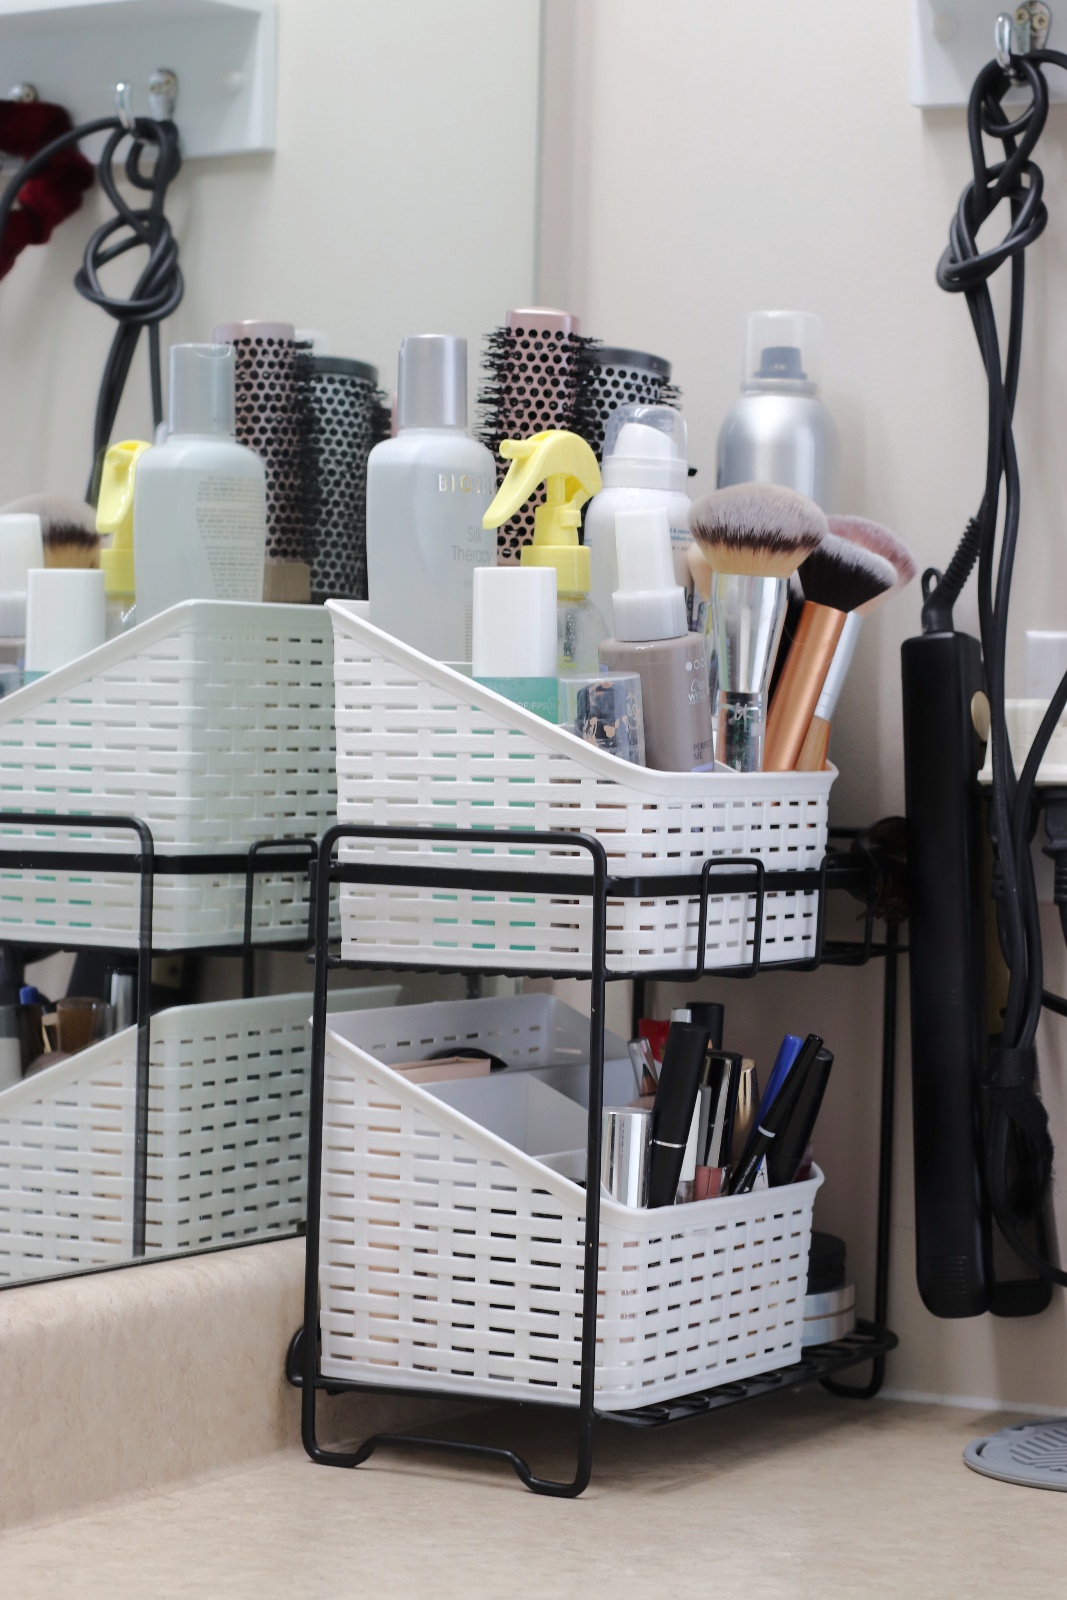 Small Organized Spaces ~ Bathroom Organizer for Hair & Makeup Products